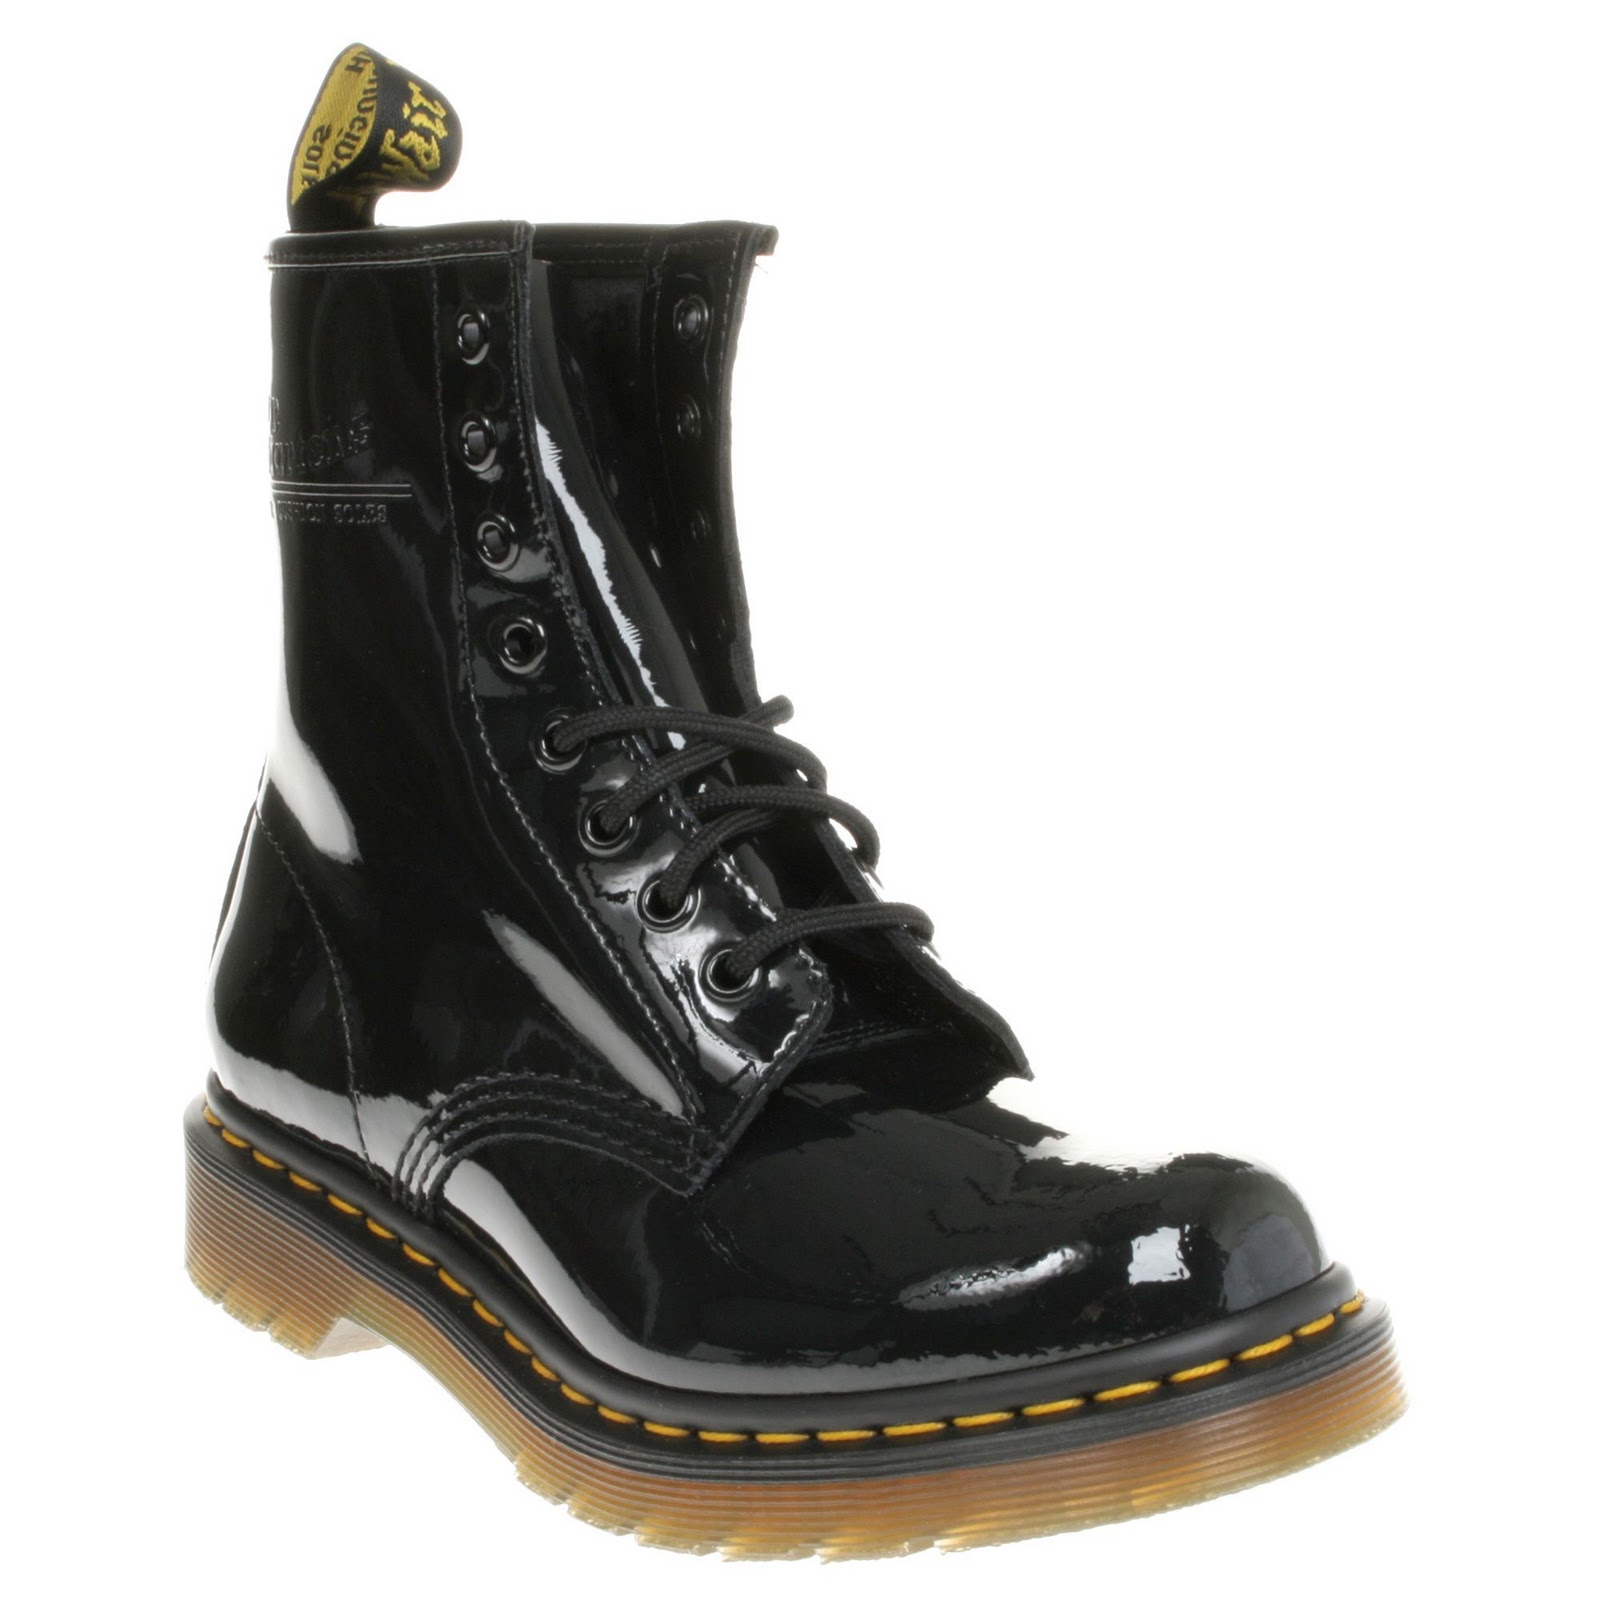 Diary of a High Street Girl: Moi in a pair of Dr. Martens...Maybe?